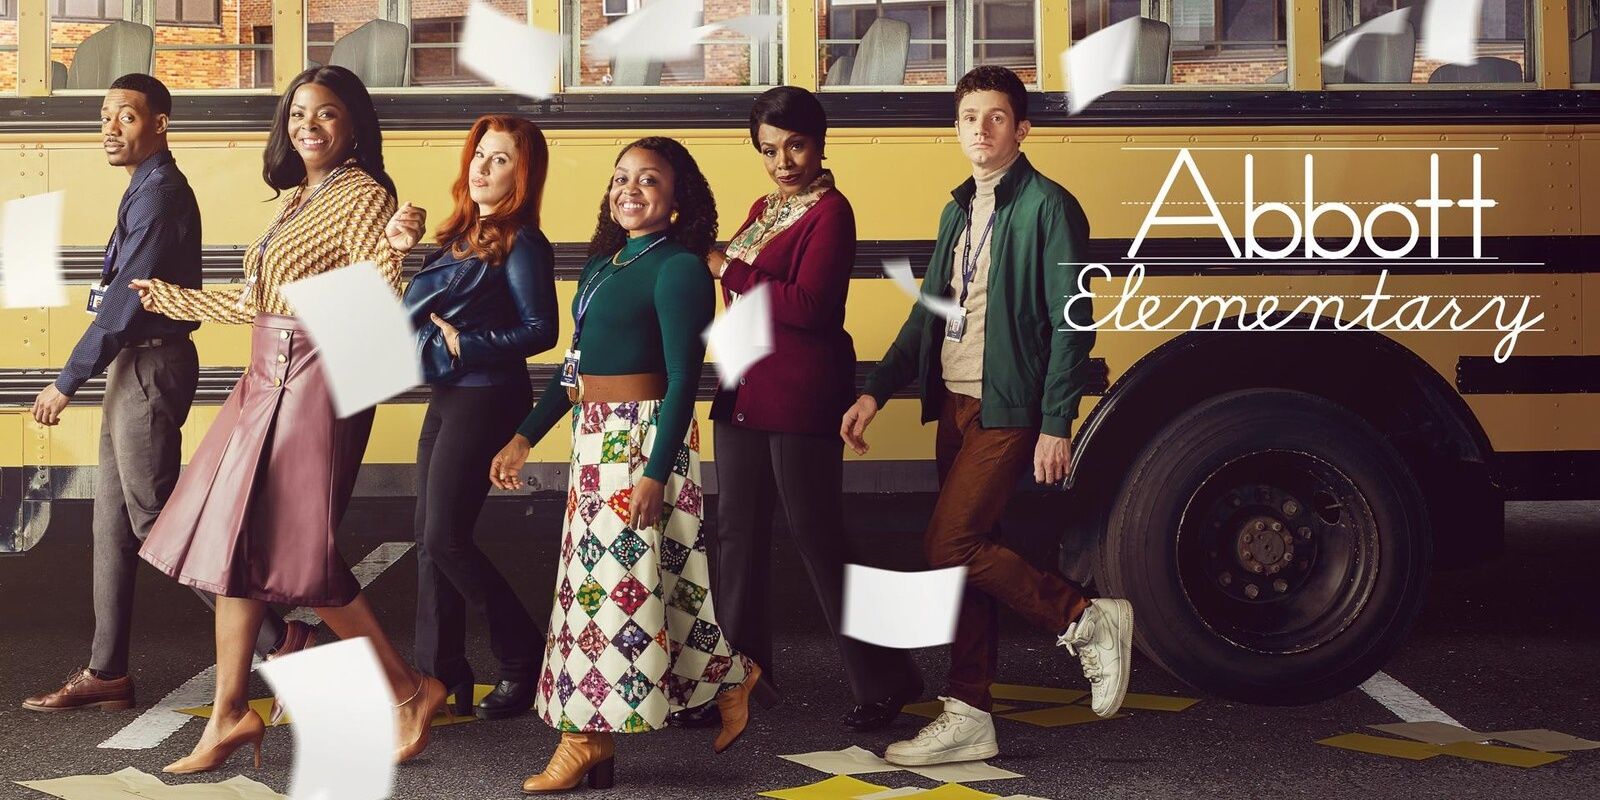 The cast of Abbott Elementary walks on a promotional image for the show